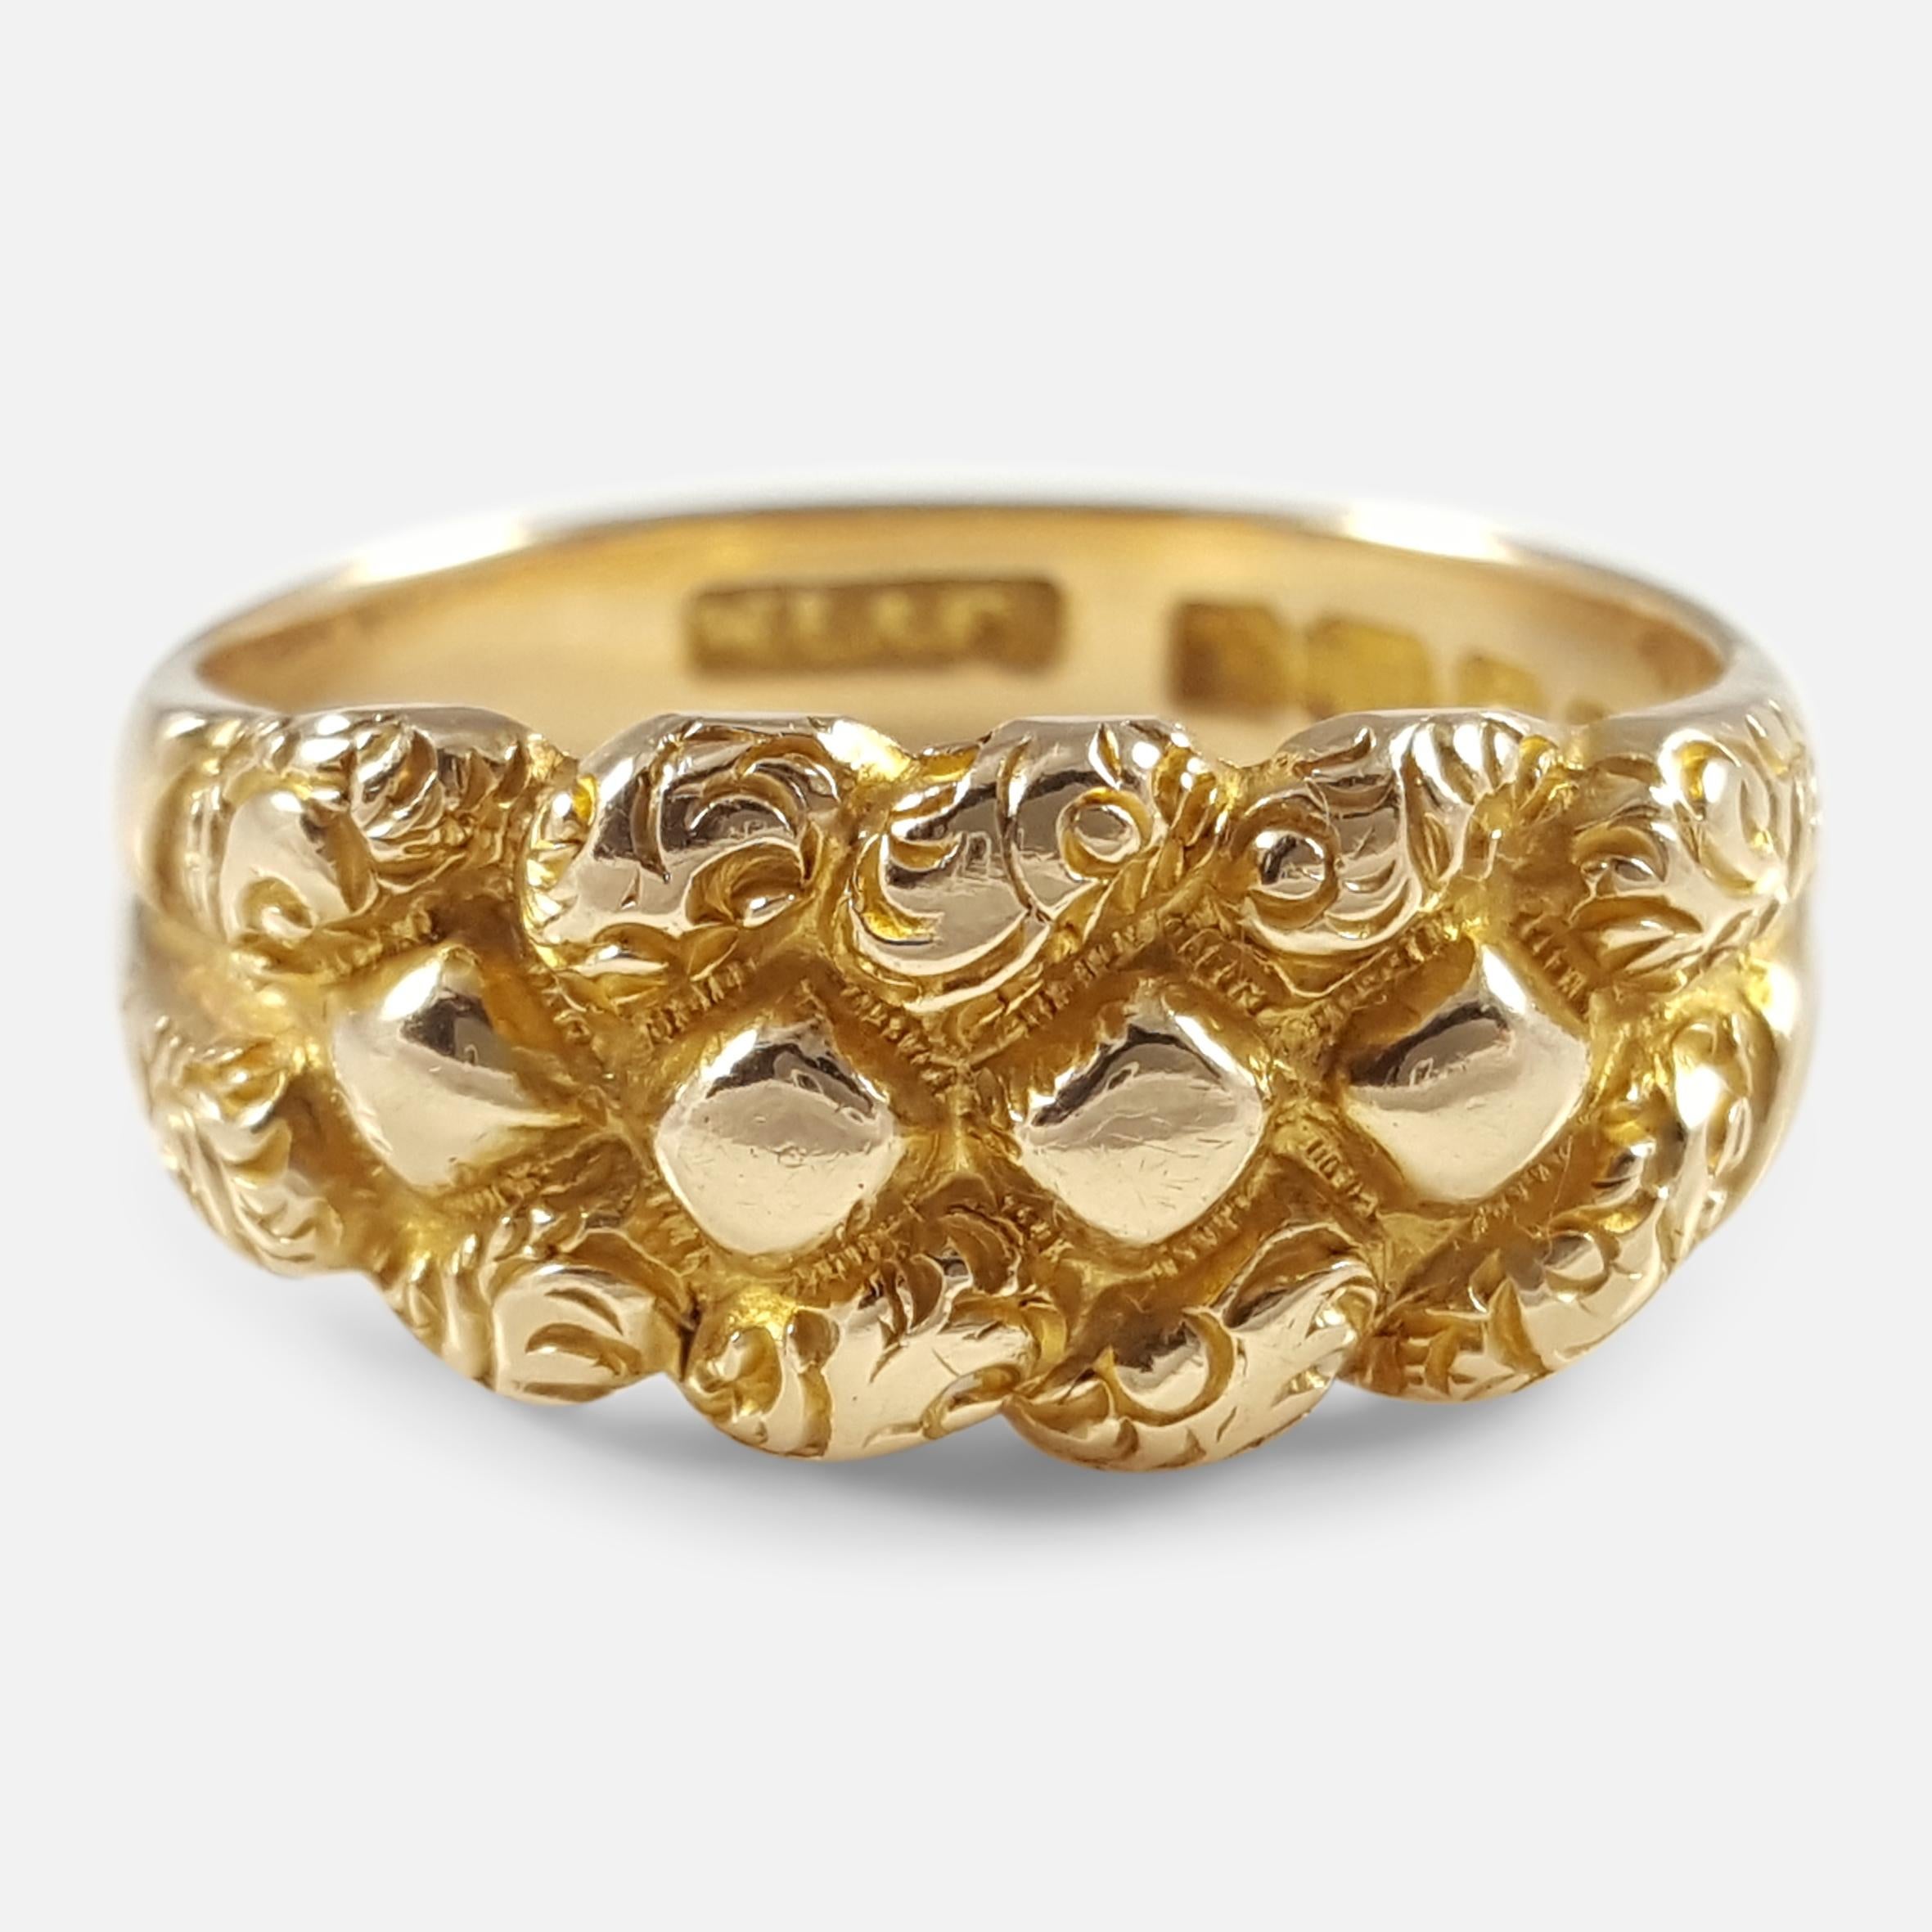 An antique Edwardian 18k yellow gold engraved keeper ring. The ring is fully hallmarked with the Birmingham Assay office stamp, '18' to denote 18 karat (carat) gold, and the date letter 'd', for (1903).

The band is strong and thick at approximately